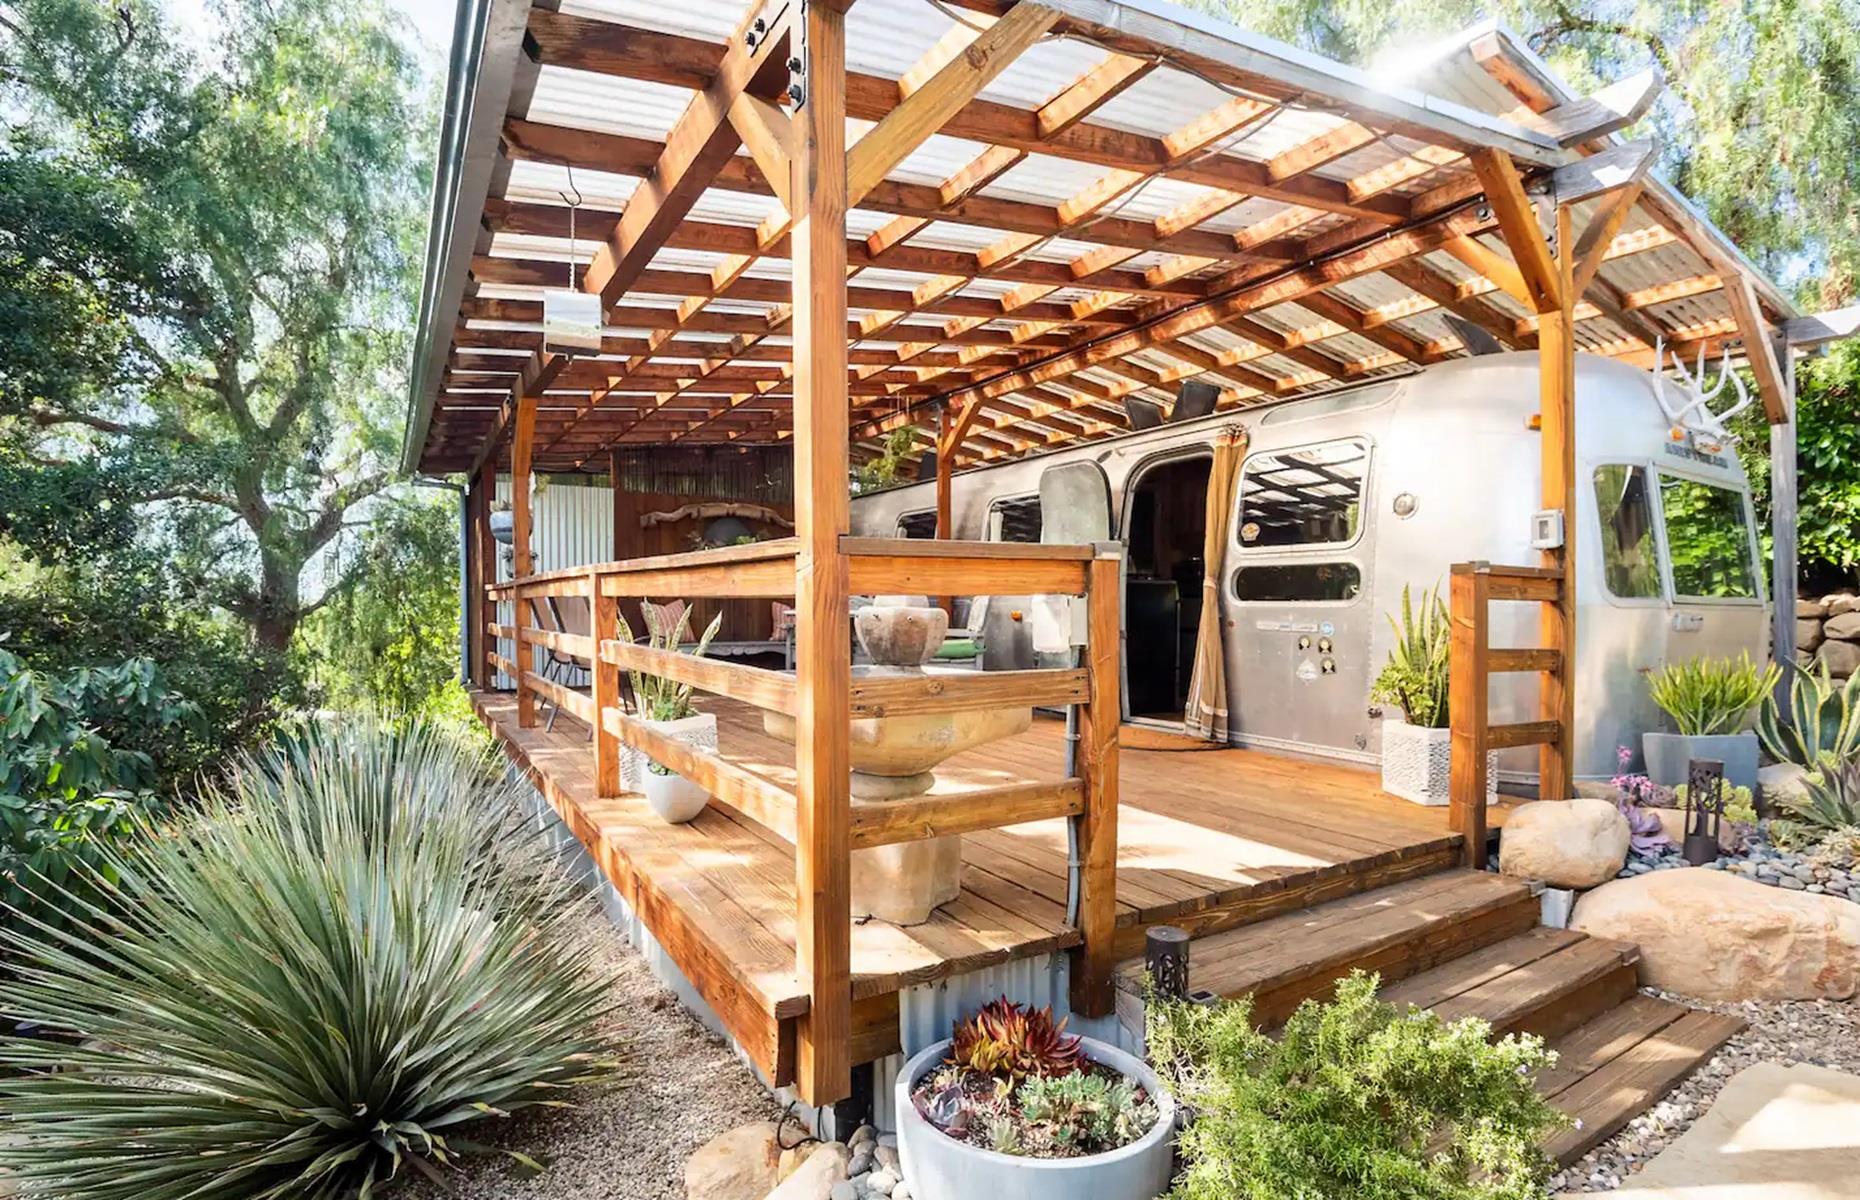 <p>Secluded on a five-acre organic farm in Carpinteria, California this <a href="https://www.airbnb.com/rooms/20068886?source_impression_id=p3_1650651879_I8BNJHRQ73ADFUK3&irgwc=1&irclid=URN0QOUXmxyPTFJwyvTSg26xUkHwtUSpHQeFXU0&ircid=4273&sharedid=&af=126295512&iratid=9627&c=.pi73.pk4273_249354&irparam1=">converted 1974 Airstream</a> is unbelievably cool. The pad belongs to Delia, who decided to create her own Airbnb to help boost her income. "When you're young, work for your land, but when you're old, let your land work for you," she said during a <a href="https://www.youtube.com/watch?v=wtyN_10Qwy4">YouTube house tour</a>.</p>  <p>Amazingly, almost everything inside is either salvaged, upcycled or handmade, including the curtains, which Delia created from old tea towels and pashminas.</p>